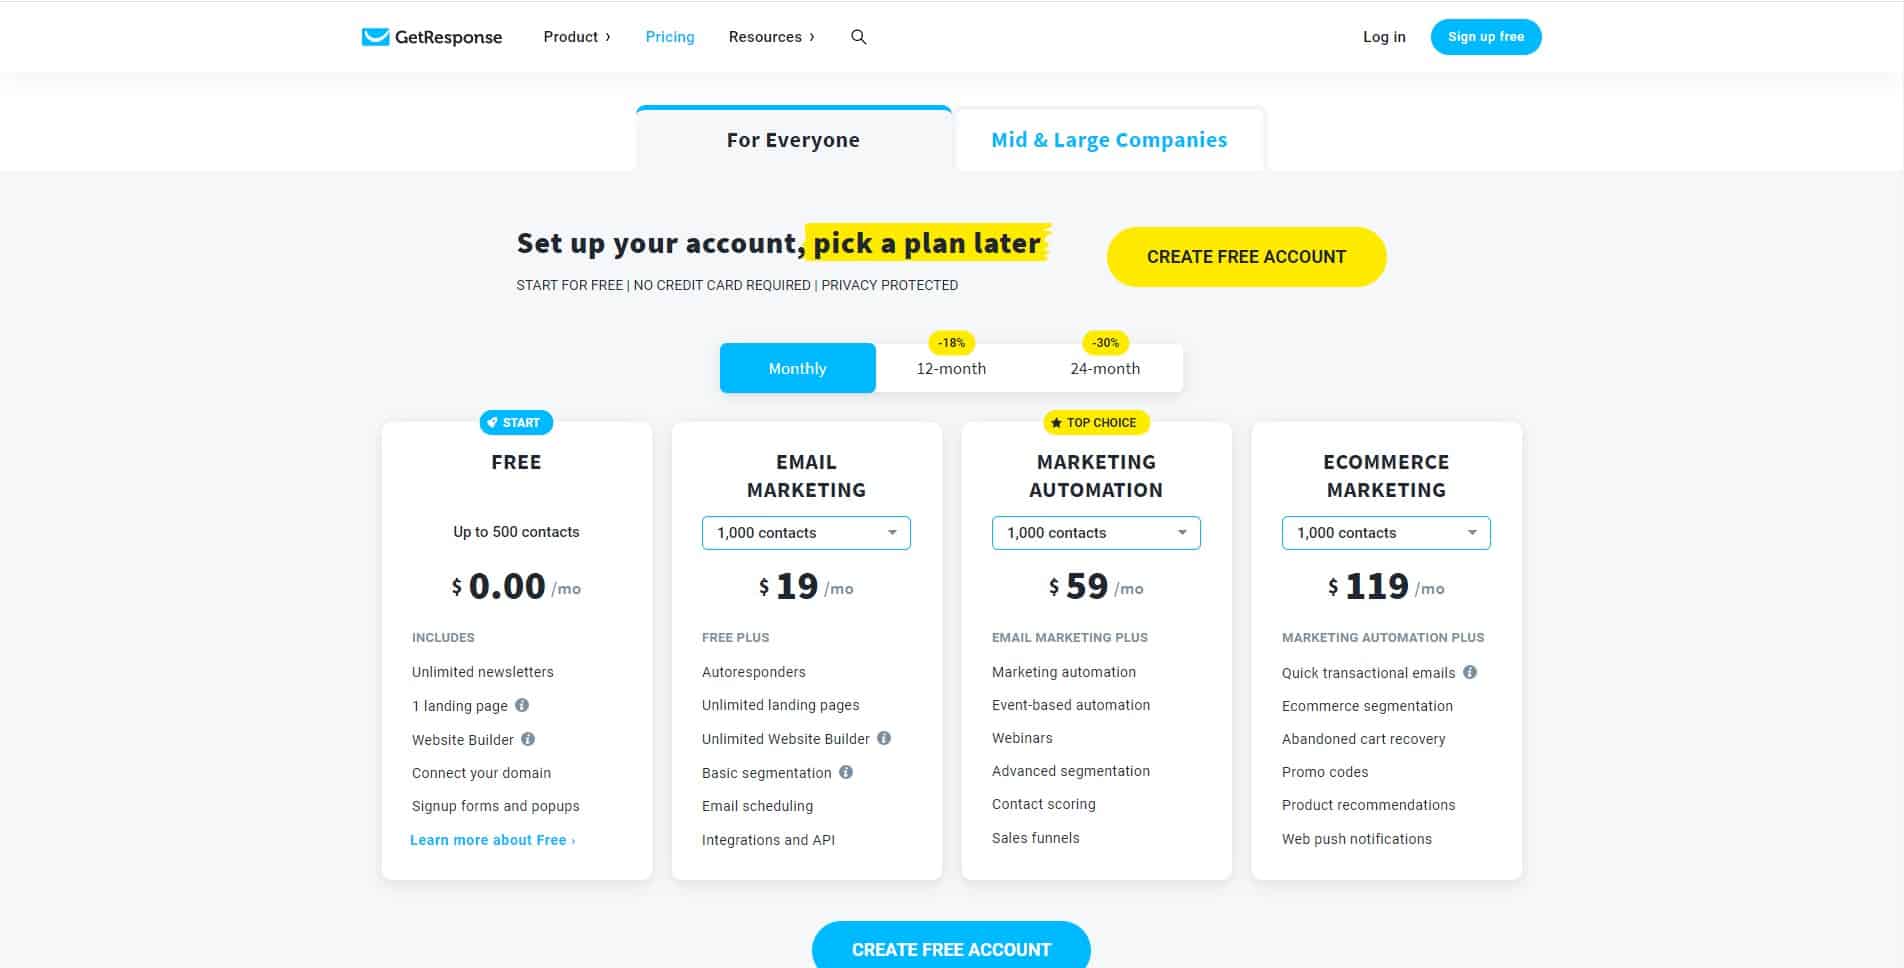 GetResponse pricing alternative to Unbounce